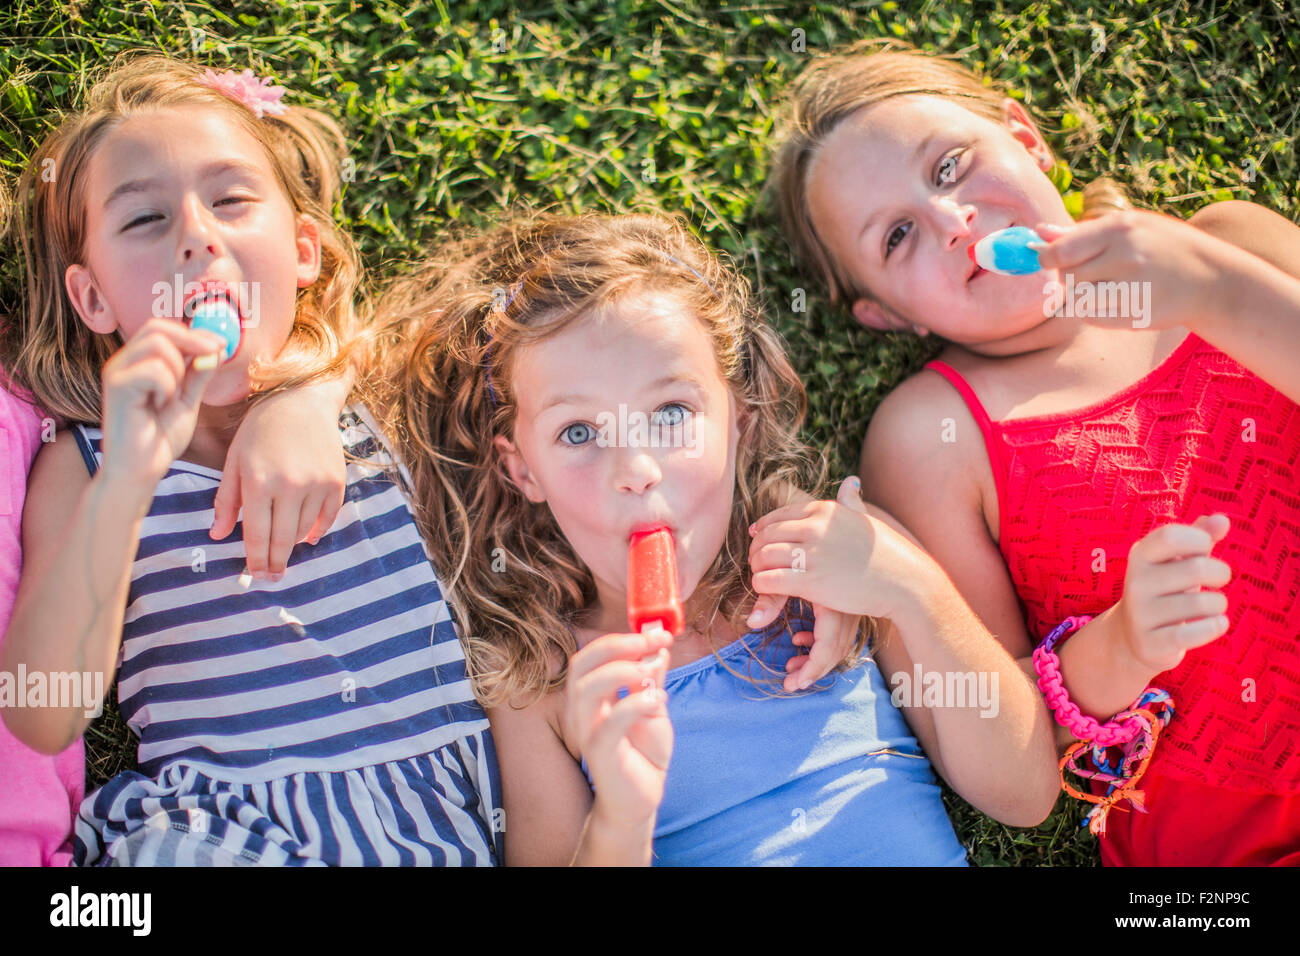 Girls eating flavored ice in grass Stock Photo